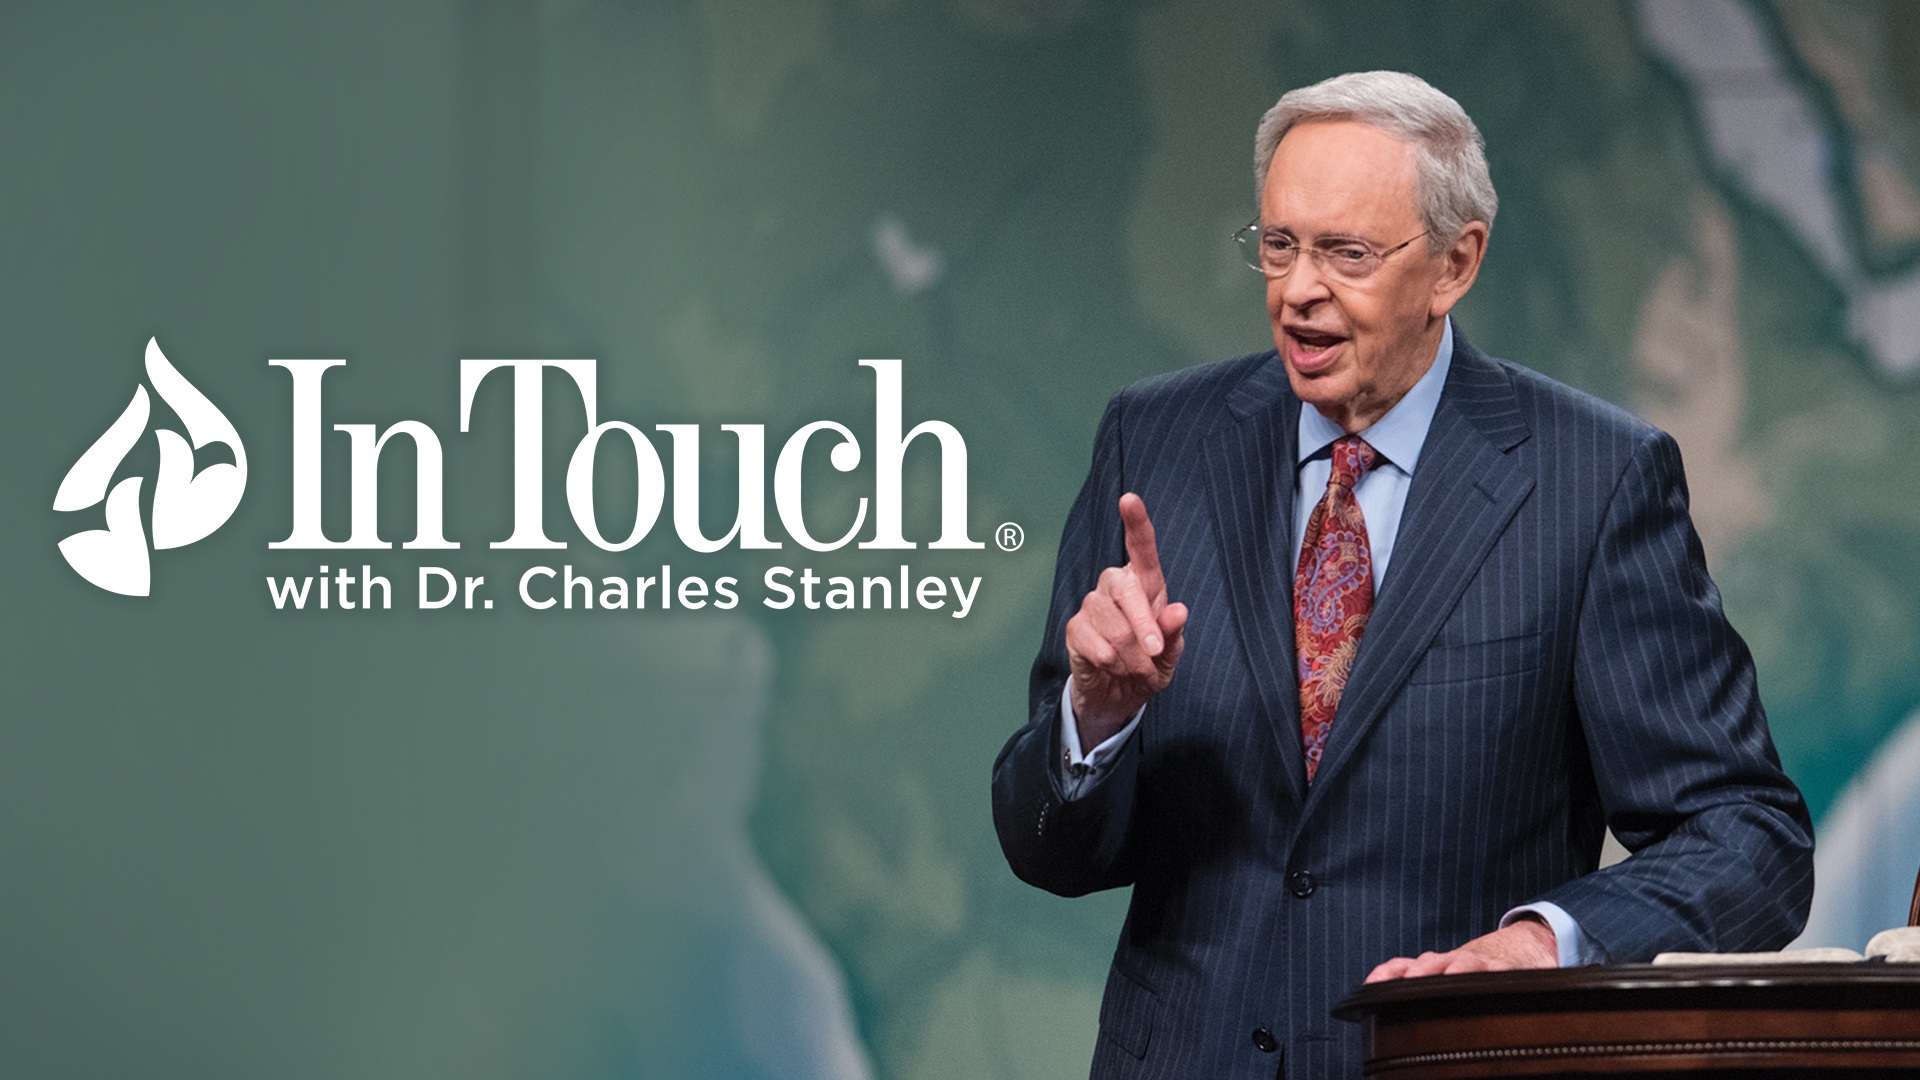 charles stanley daily bible study